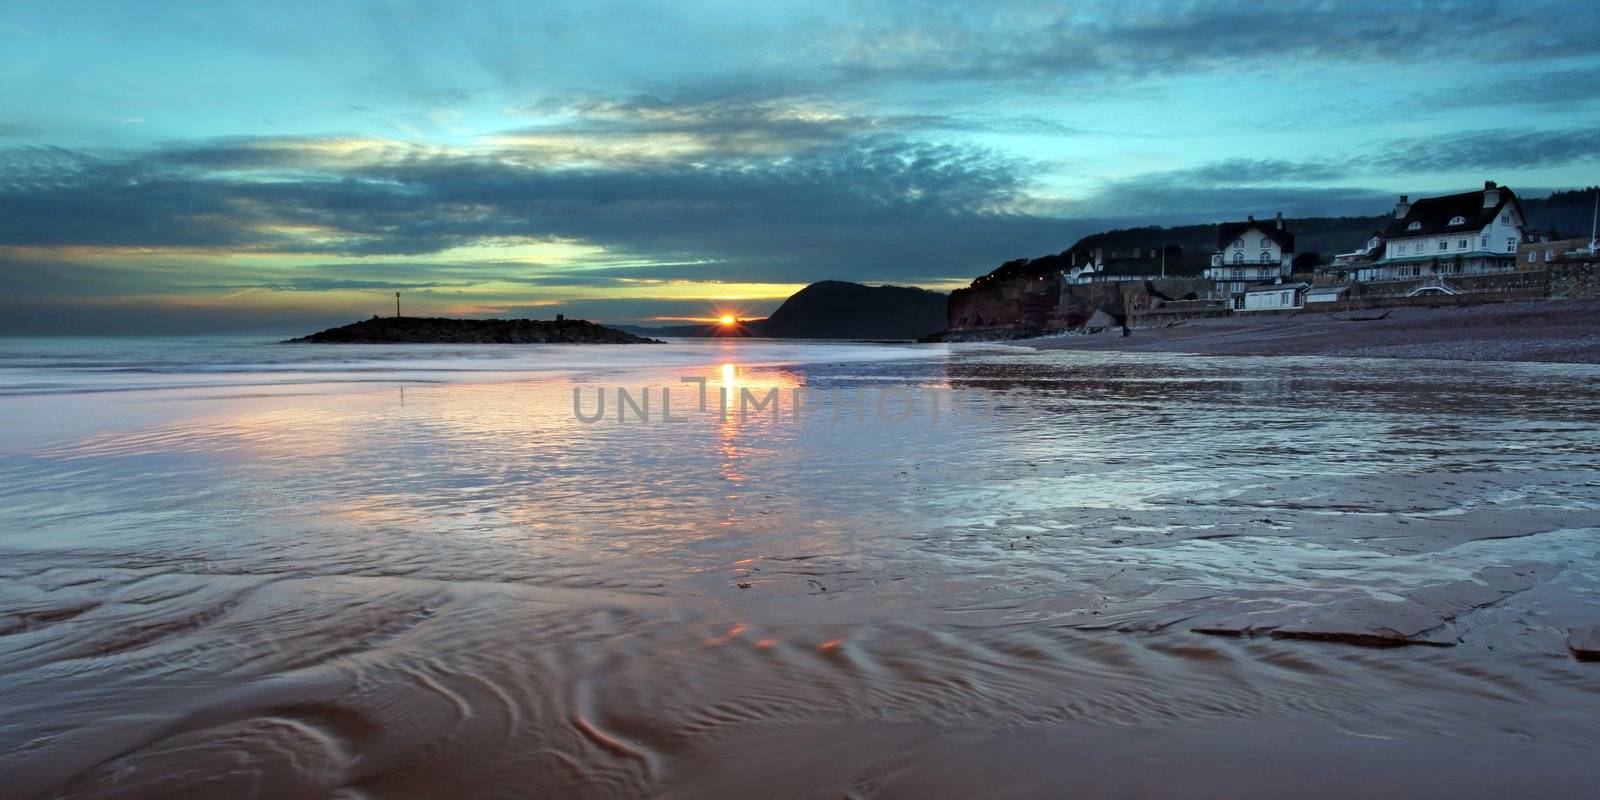 The sunsets over sidmouth beach in east devon south west england